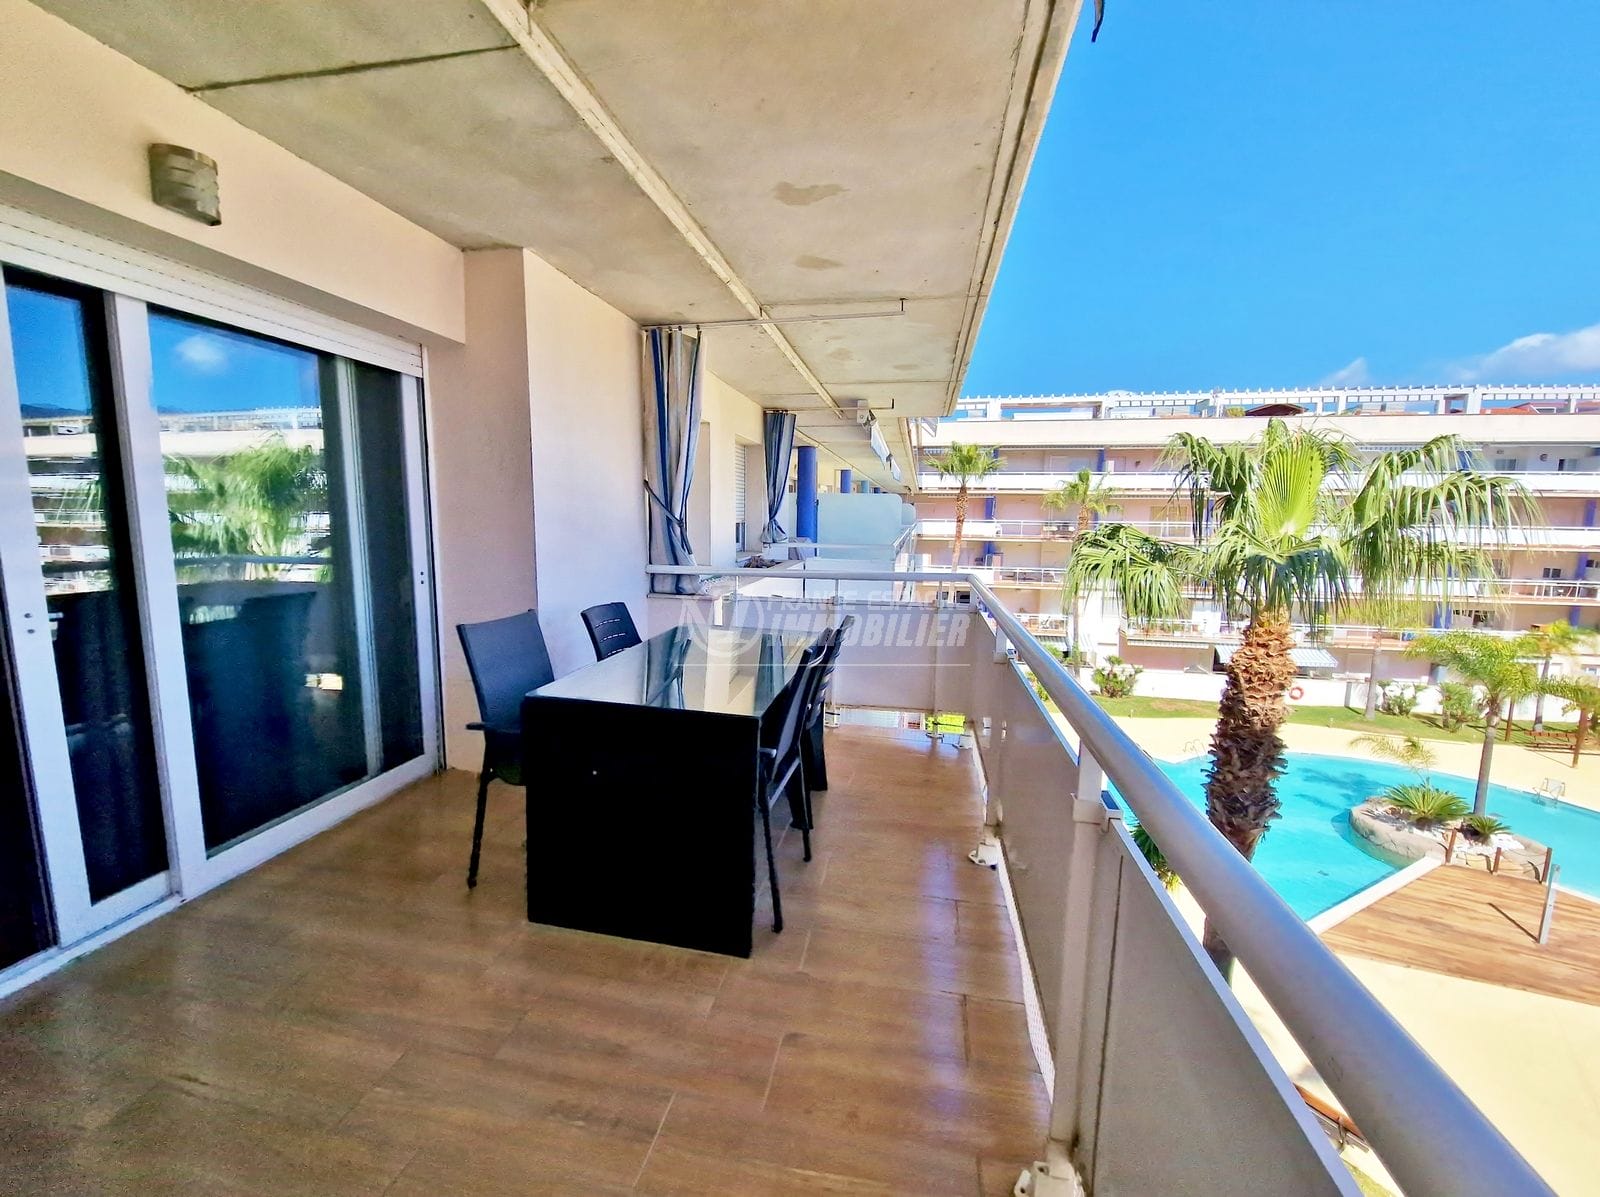 EXCLUSIVE ROSES - 2-BEDROOM APARTMENT, BEAUTIFUL TERRACE, PRIVATE PARKING